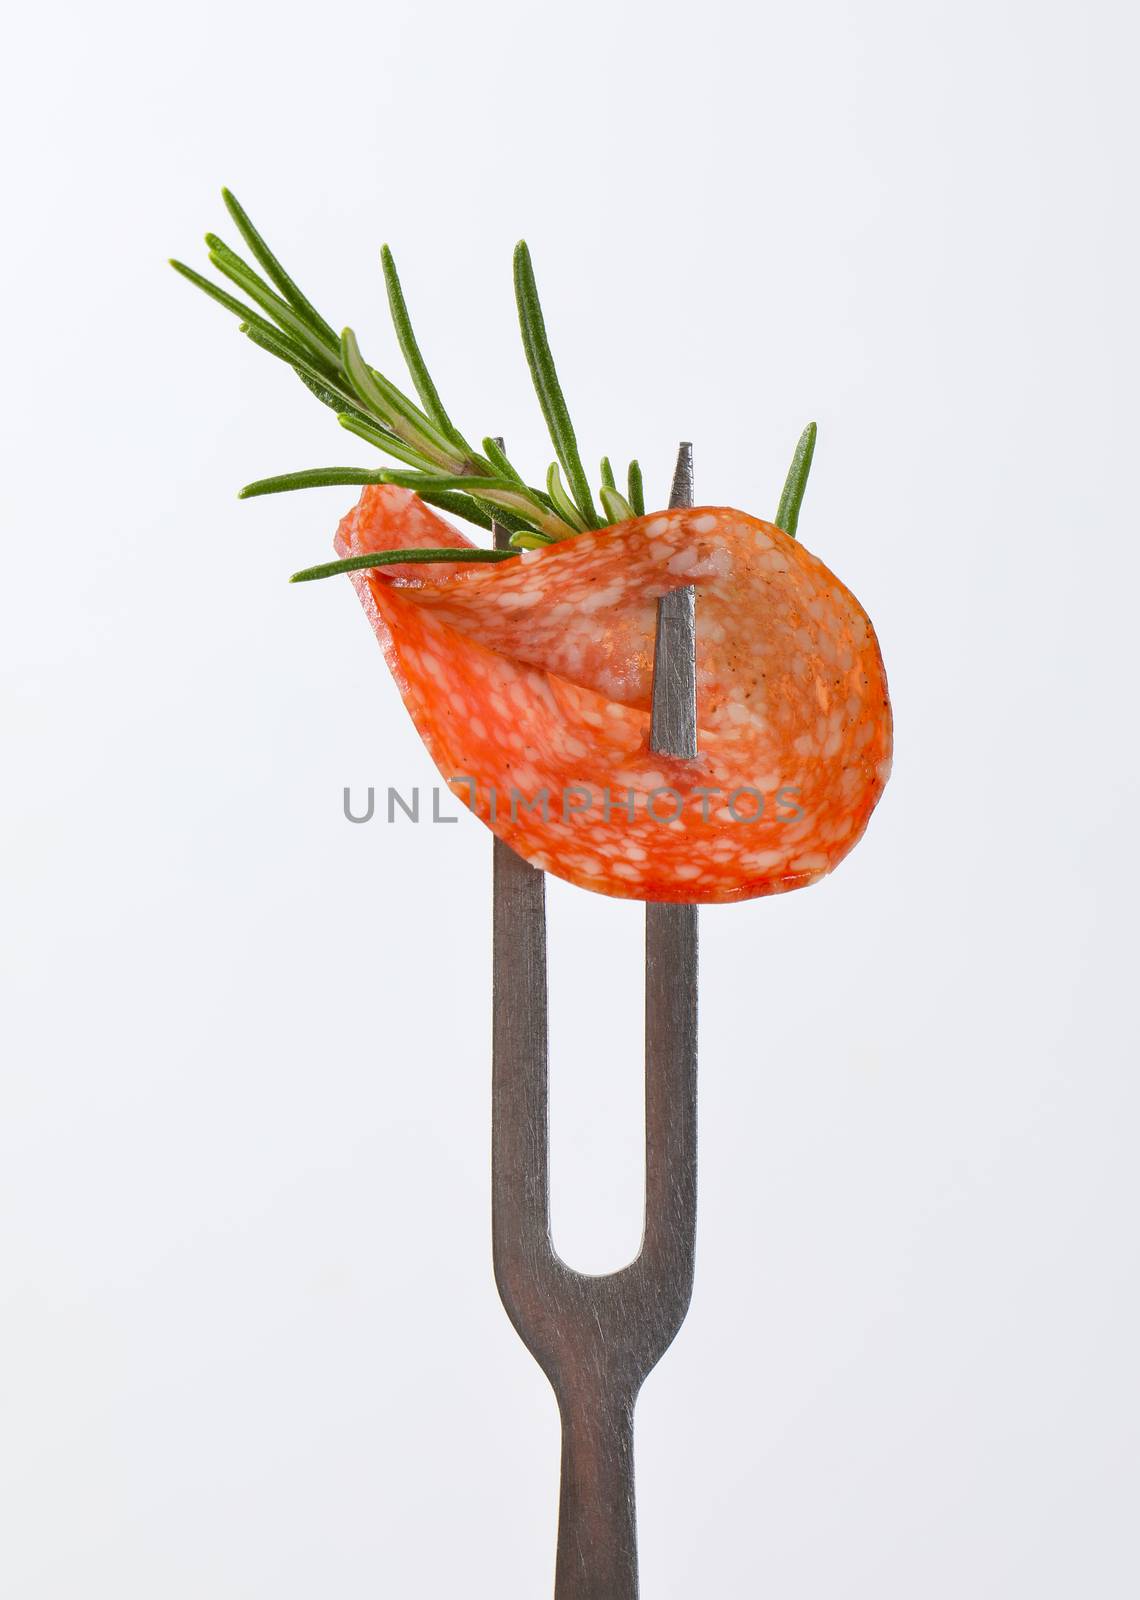 Slice of Hungarian salami and fresh rosemary on fork